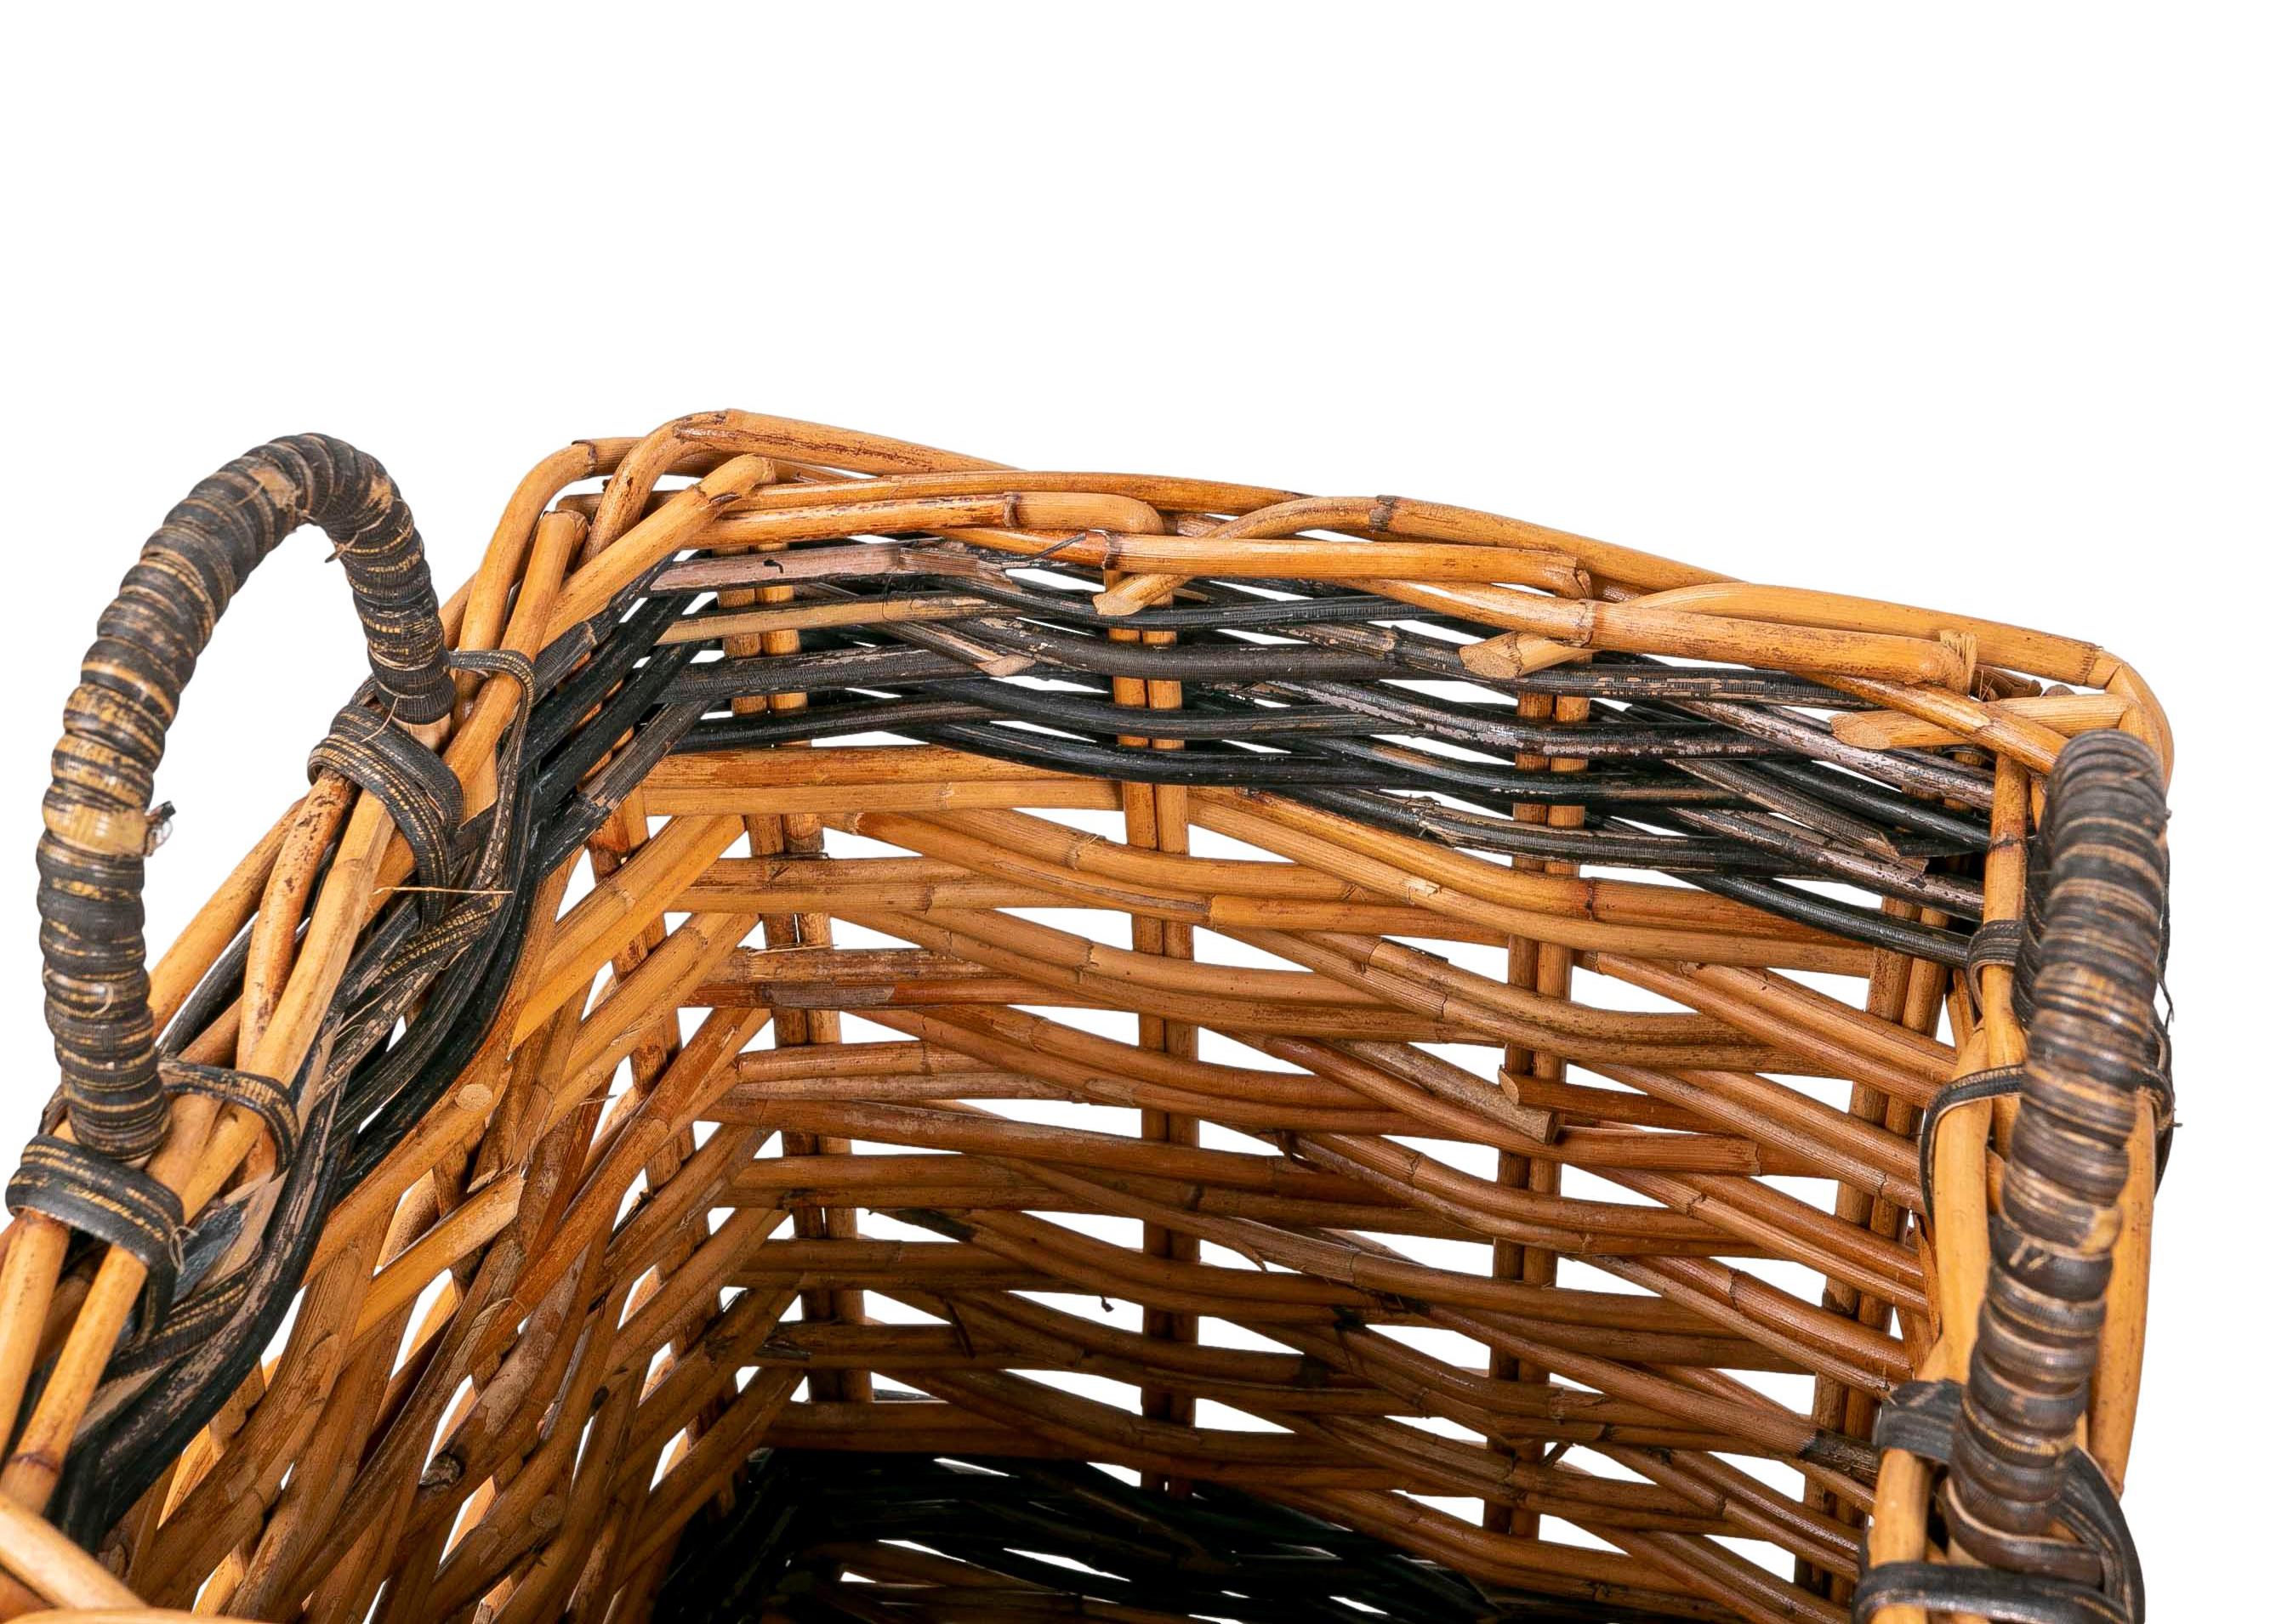 Set Consisting of Three Handmade Wicker Baskets For Sale 7